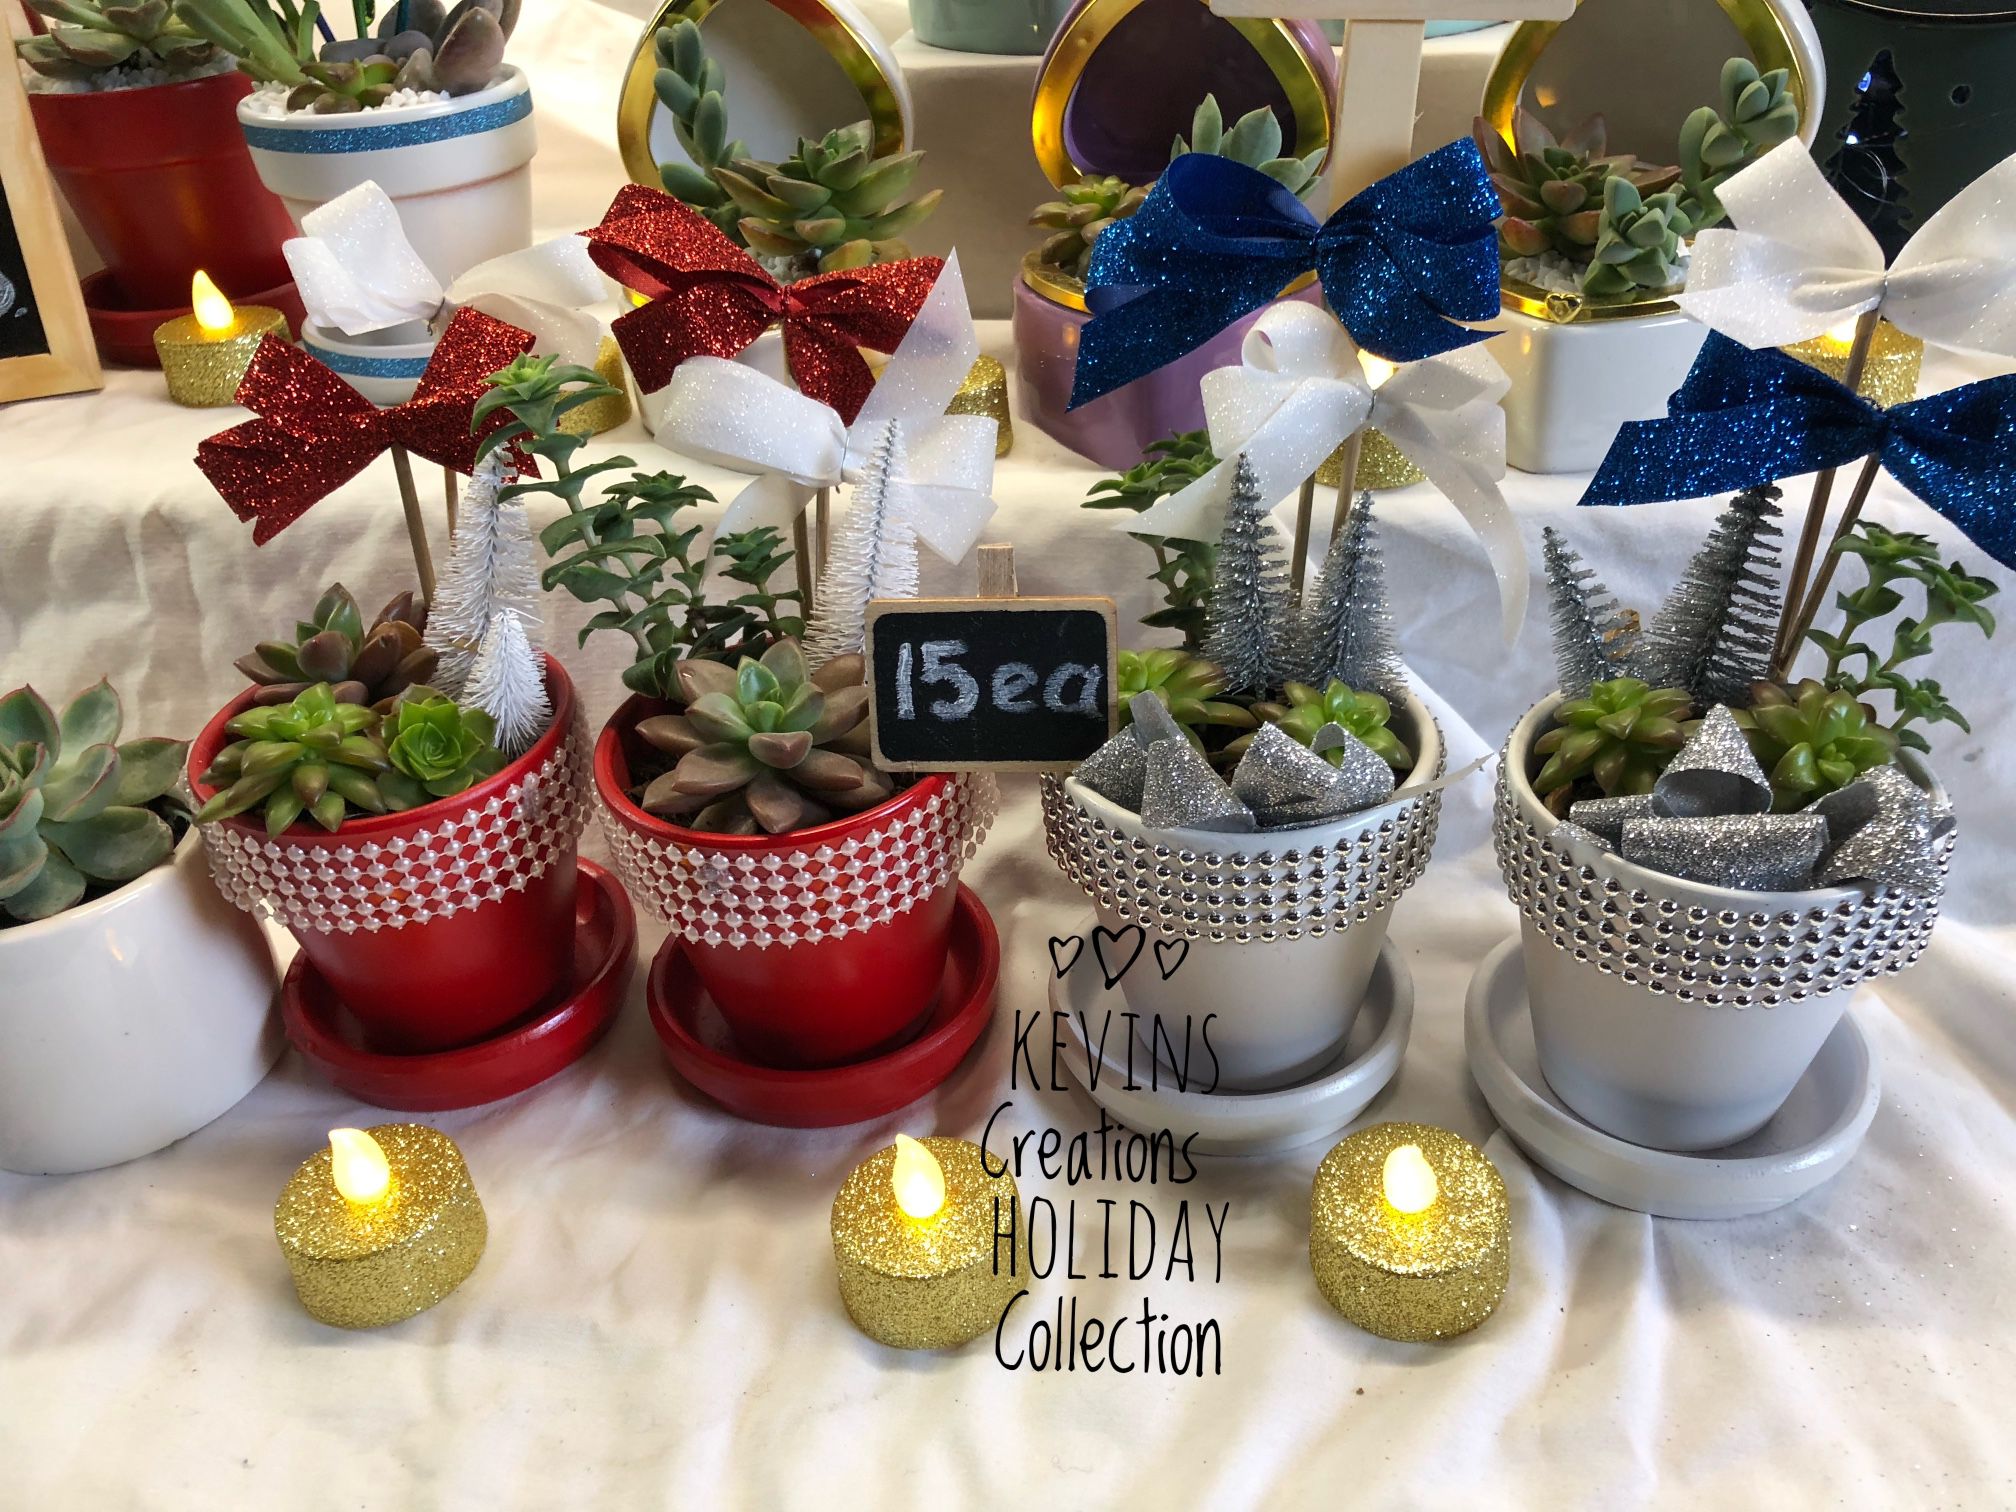 Kevin’s Creations Holiday Collection Beautiful Succulent Arrangements With Battery Powered Waterproof Lights 